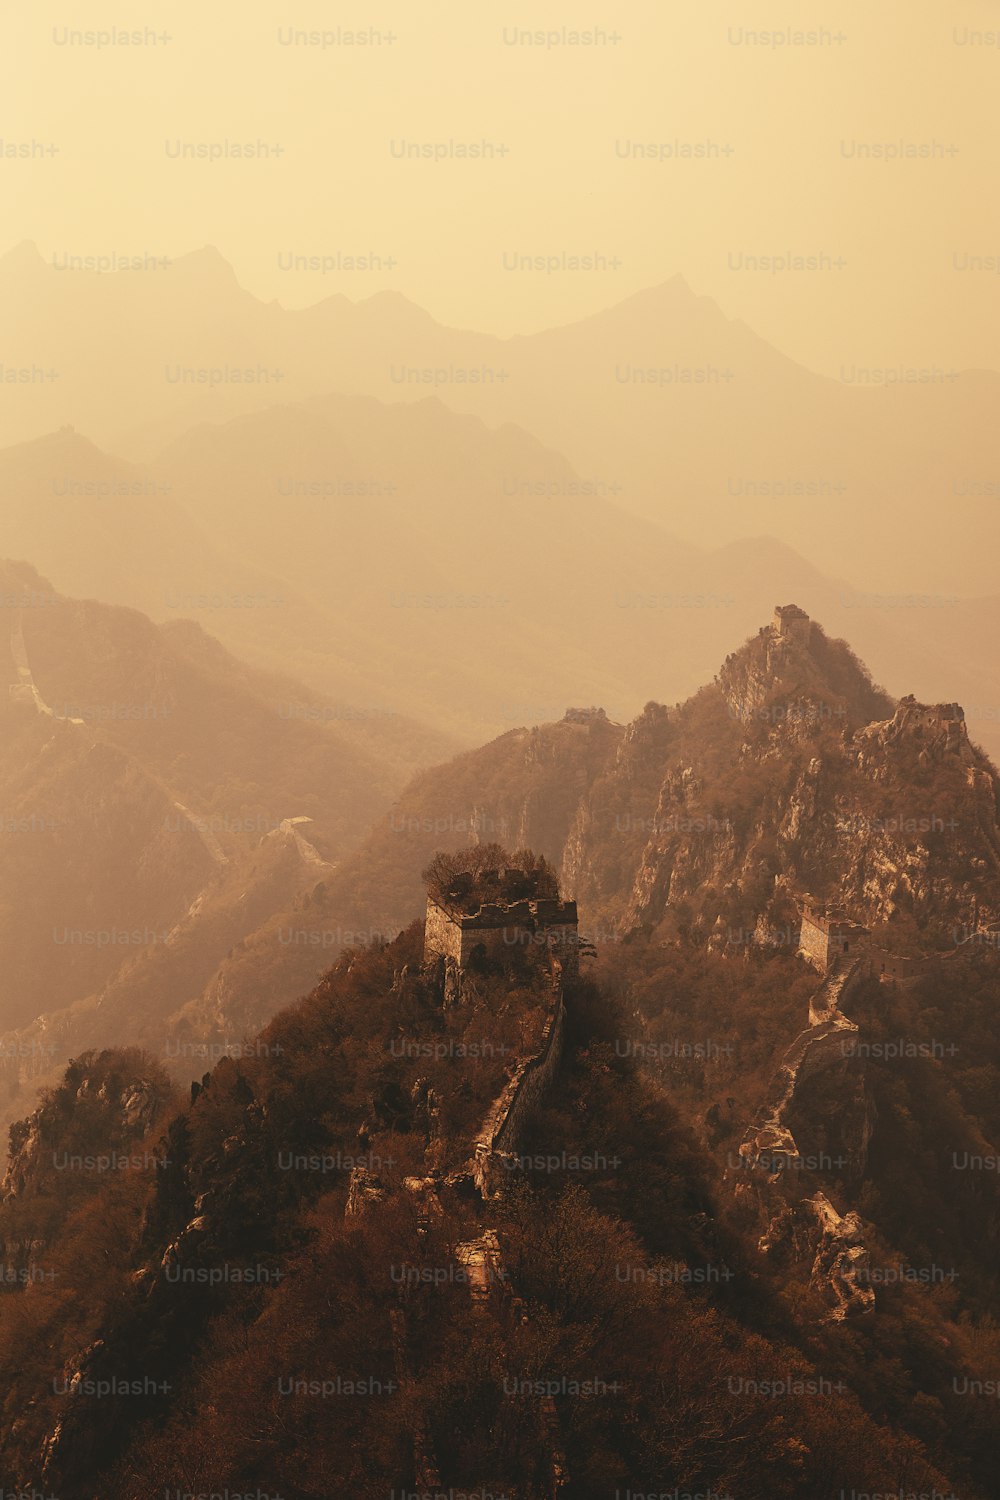 a view of the great wall of china from the top of a mountain